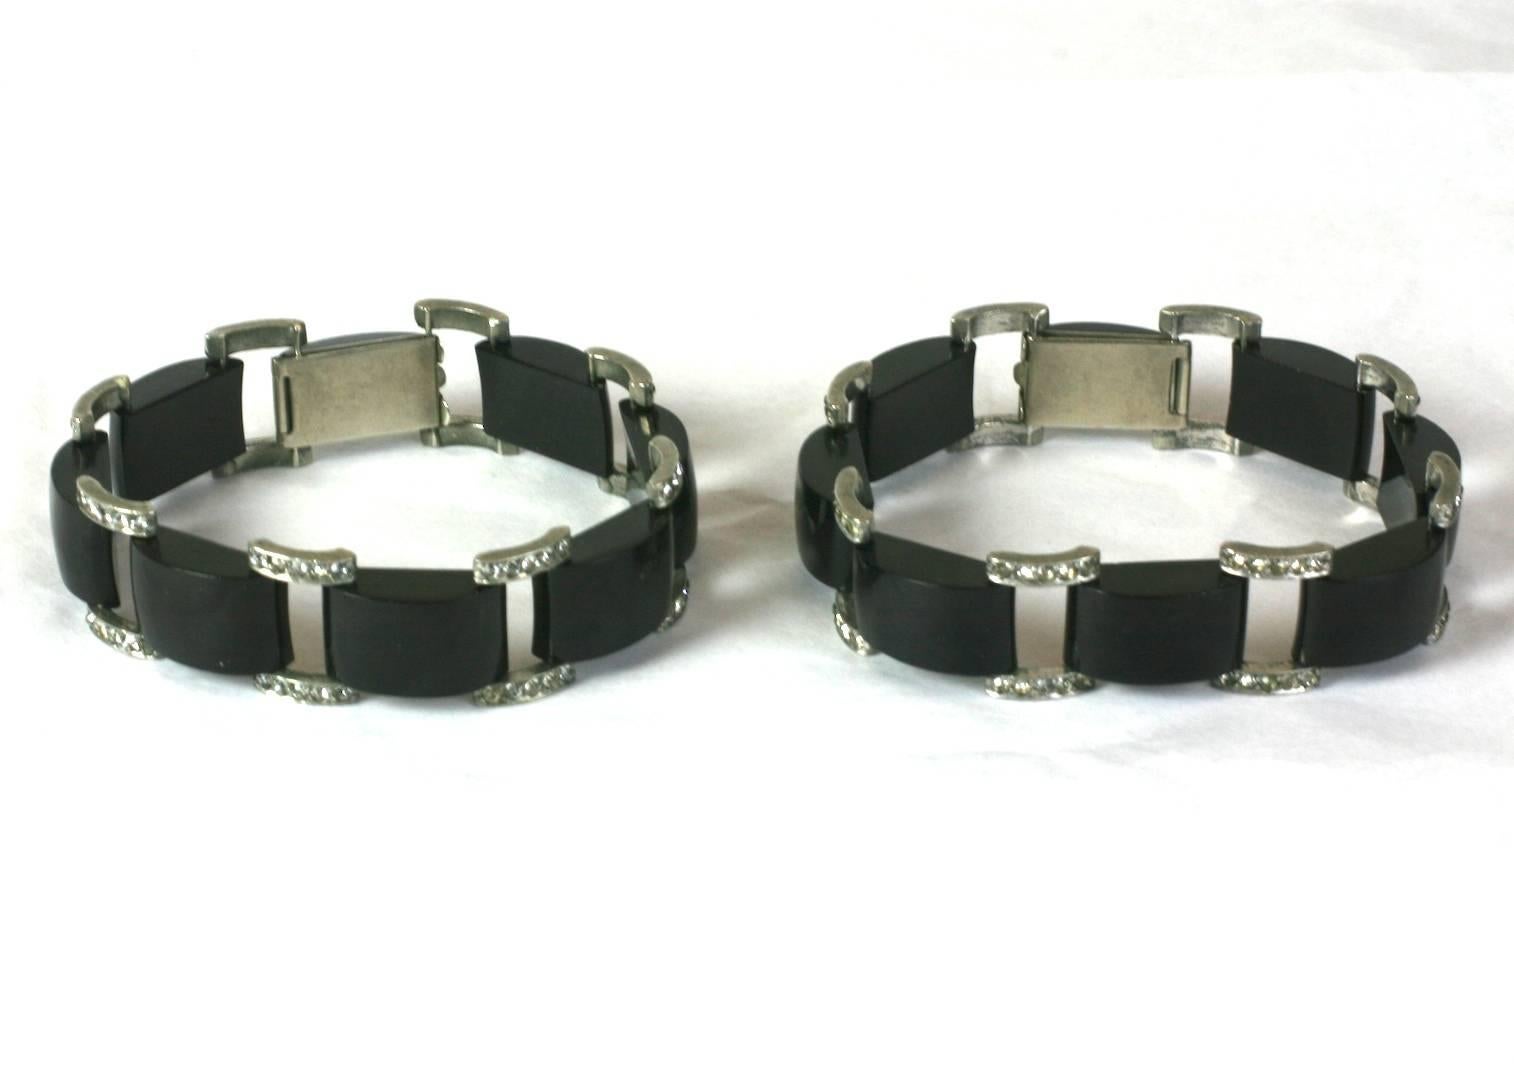 Attractive, matched pair of Art Deco black bakelite and paste link bracelets from the 1930's, set in chrome. Excellent Condition. 1930's USA.
Length 7.50